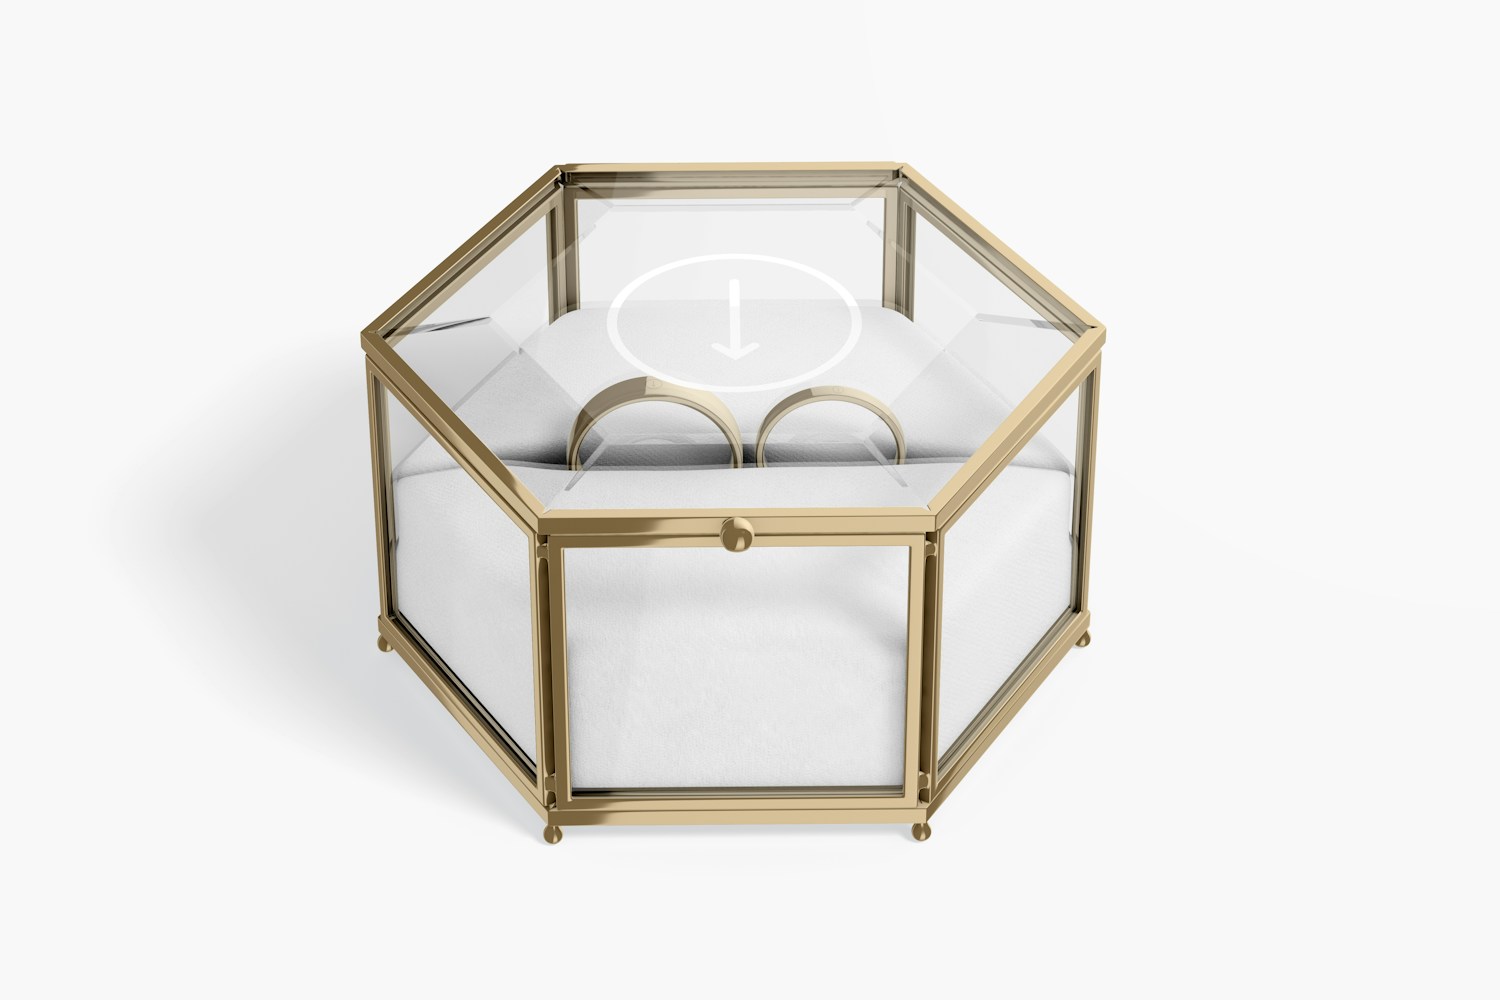 Hexagonal Clear Ring Boxes Mockup, Front and Back